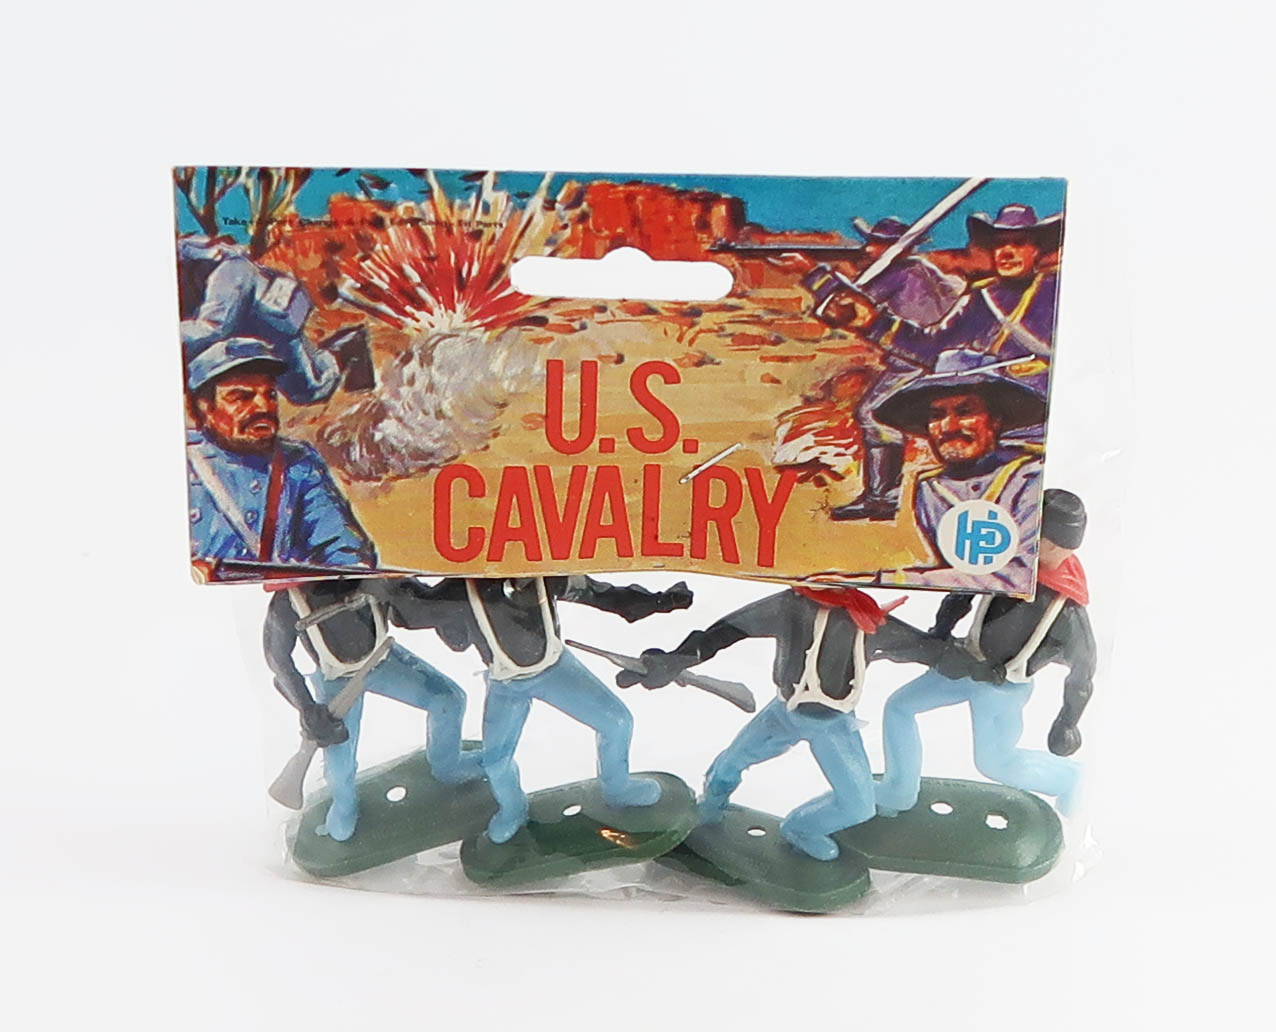 US Cavalry Union Soldiers